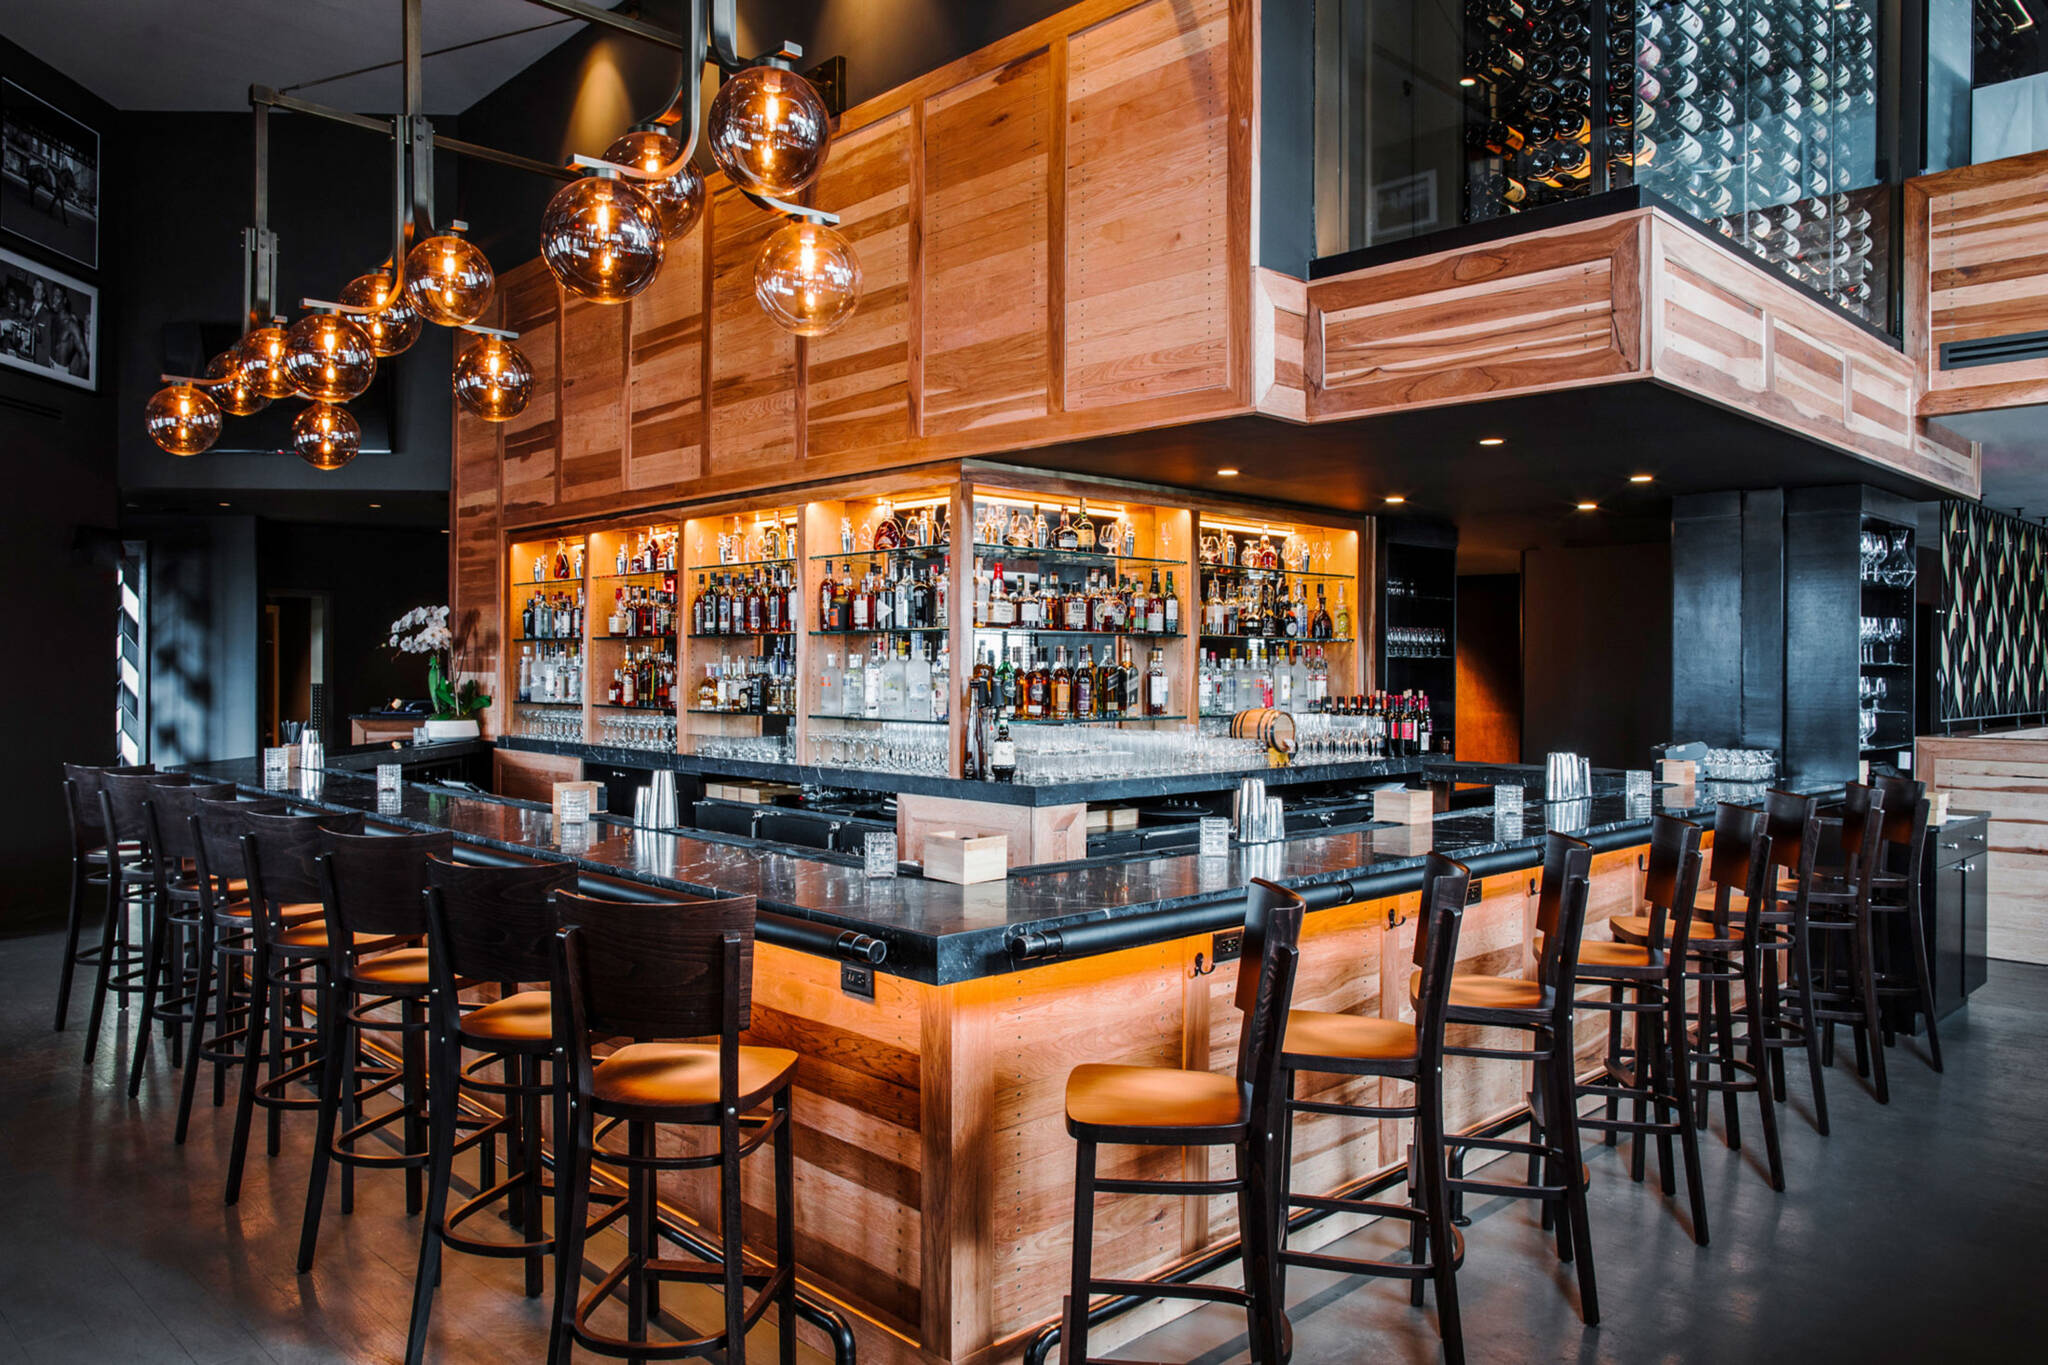 Bar of the American Cut Bar & Grill project located at 495 Sylvan Avenue in Englewood Cliffs, New Jersey designed by the architecture studio Danny Forster & Architecture